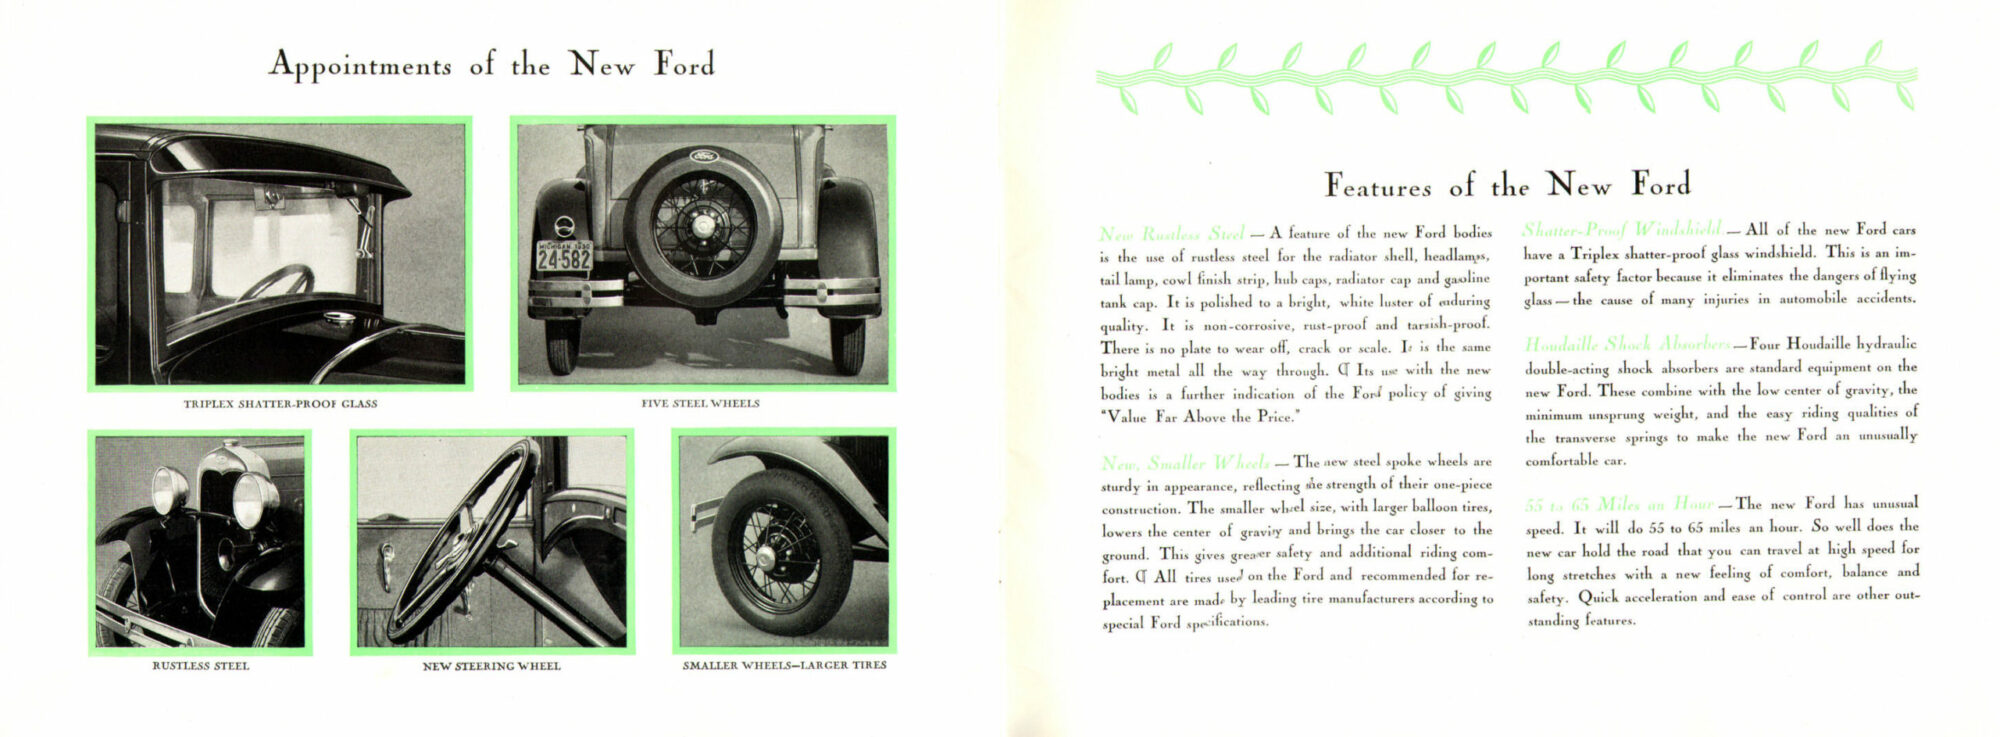 historical Ford advertisement